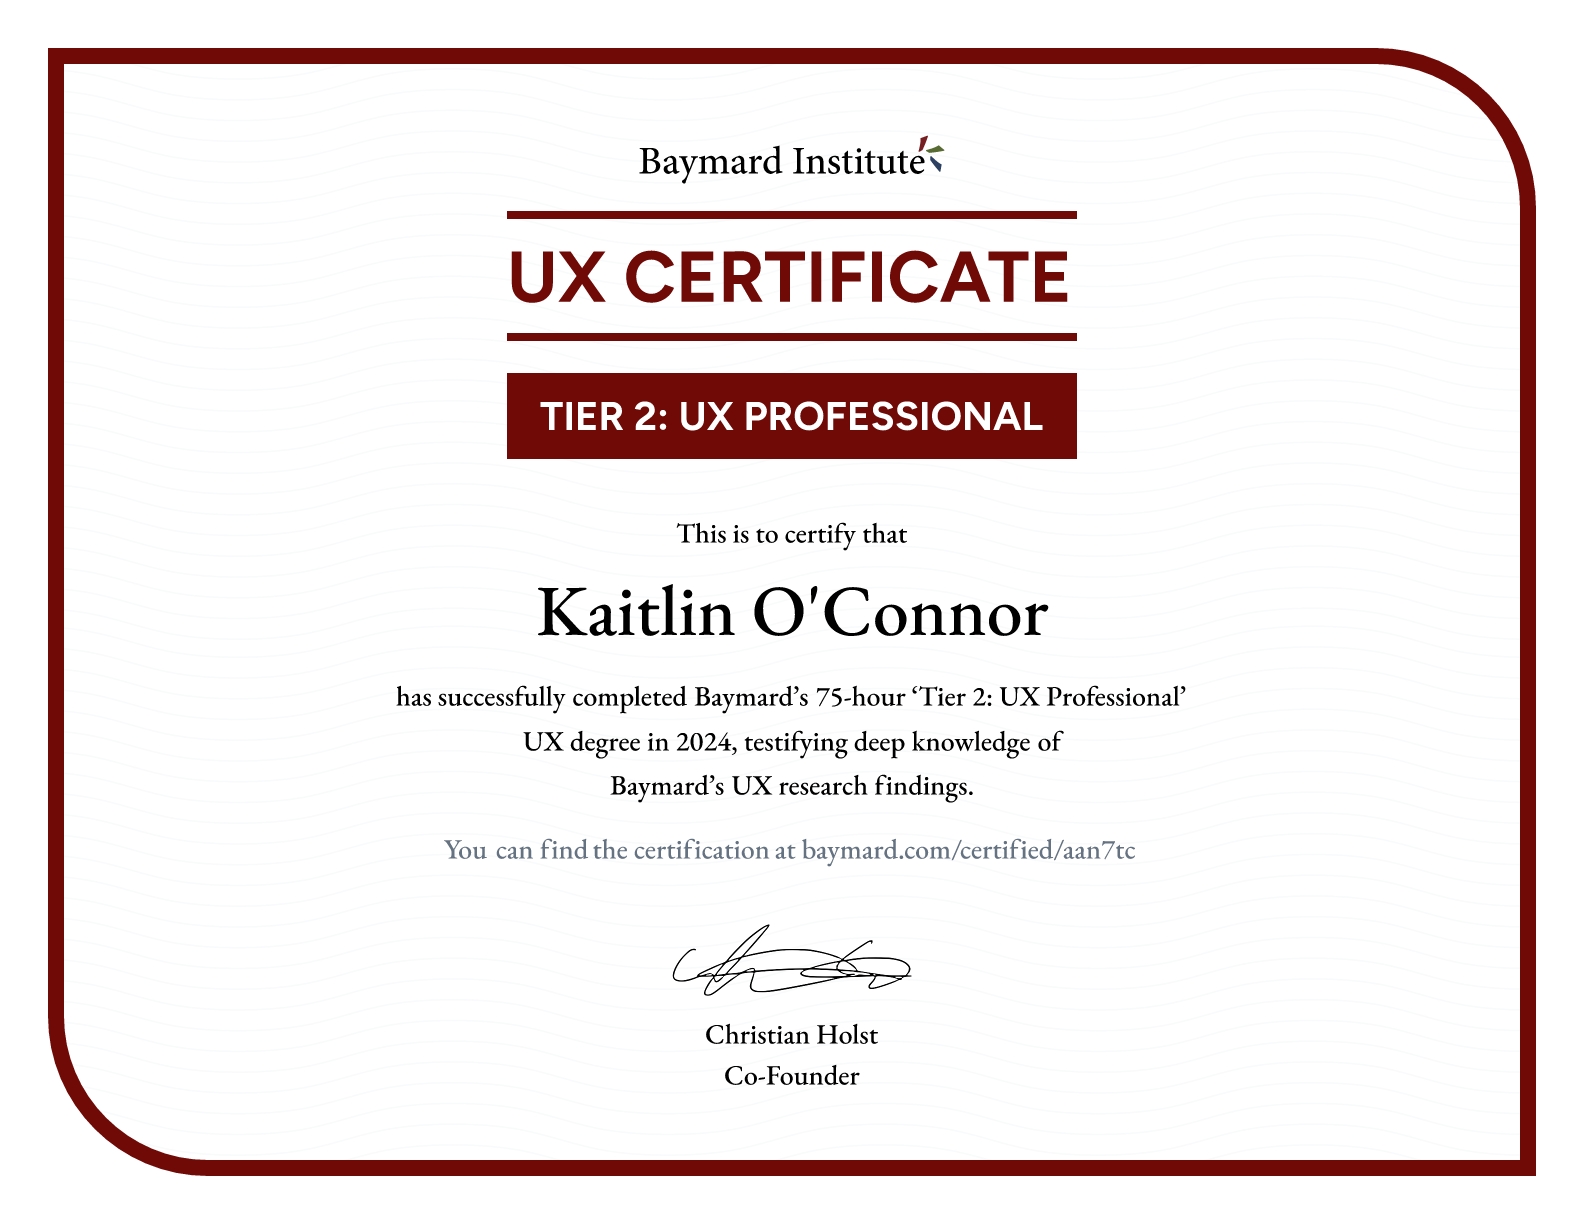 Kaitlin O'Connor’s certificate